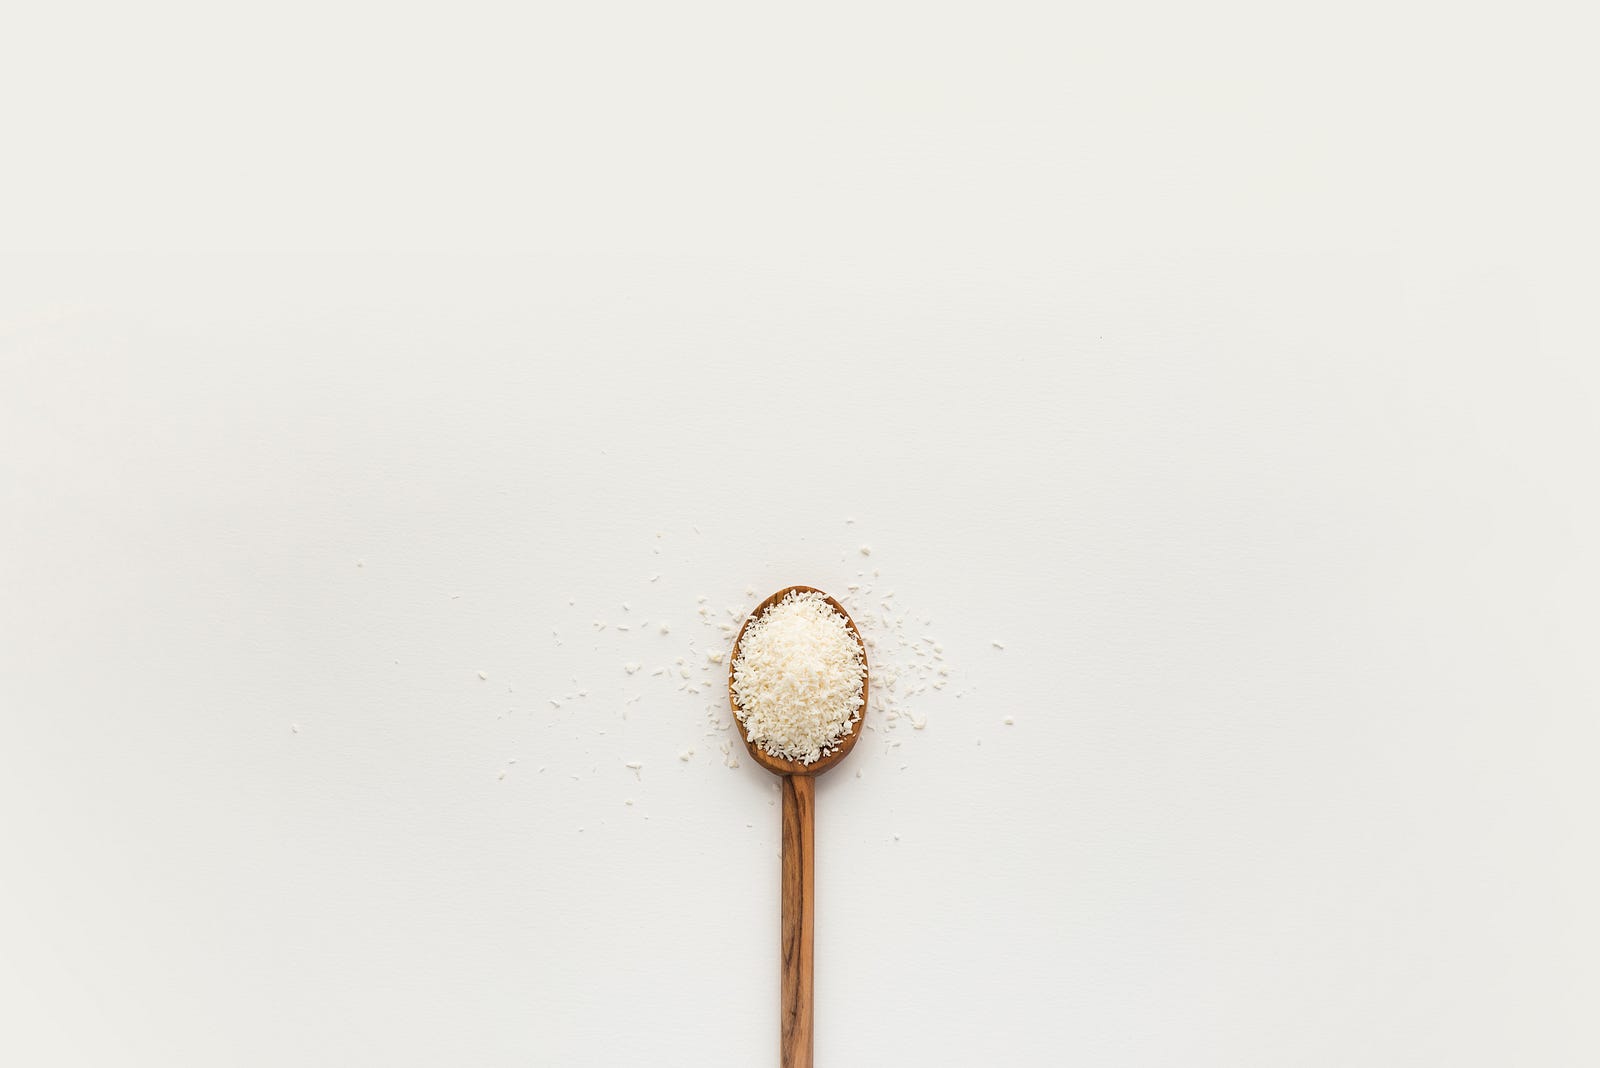 A wooden spoon extends from the bottom of the image, filled with coarse white salt. There is a white background. Too much (or too little) salt is bad for health.